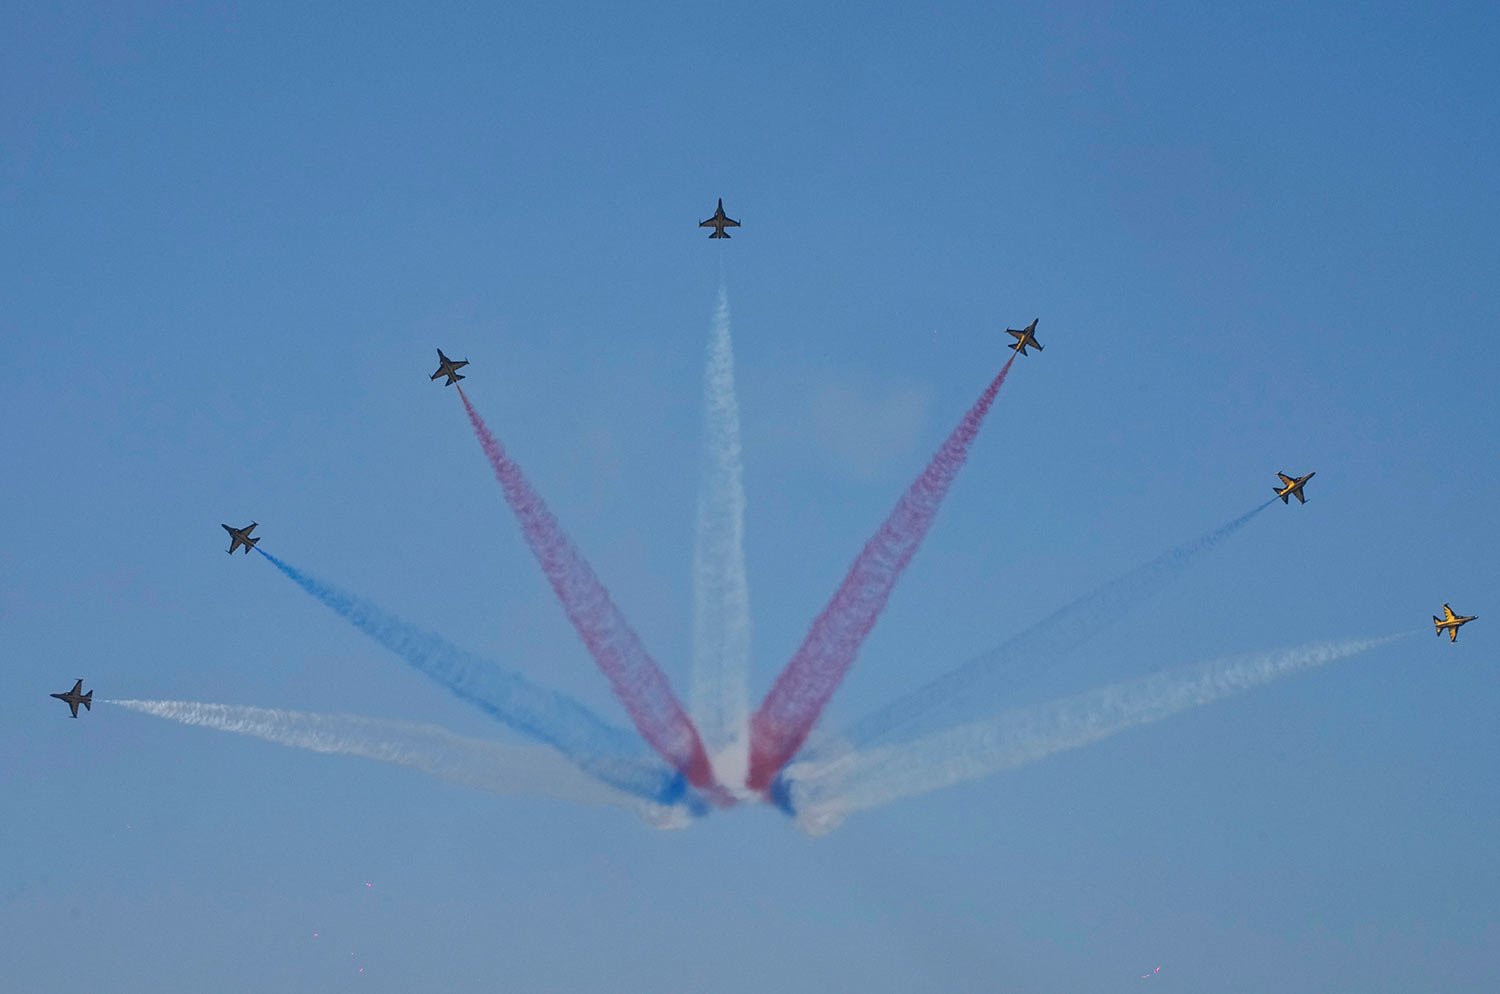  South Korean Air Force's Black Eagles aerobatic team performs during the press day of the Seoul International Aerospace and Defense Exhibition 2023 at Seoul Air Base in Seongnam, South Korea, Monday, Oct. 16, 2023. (AP Photo/Ahn Young-joon) 